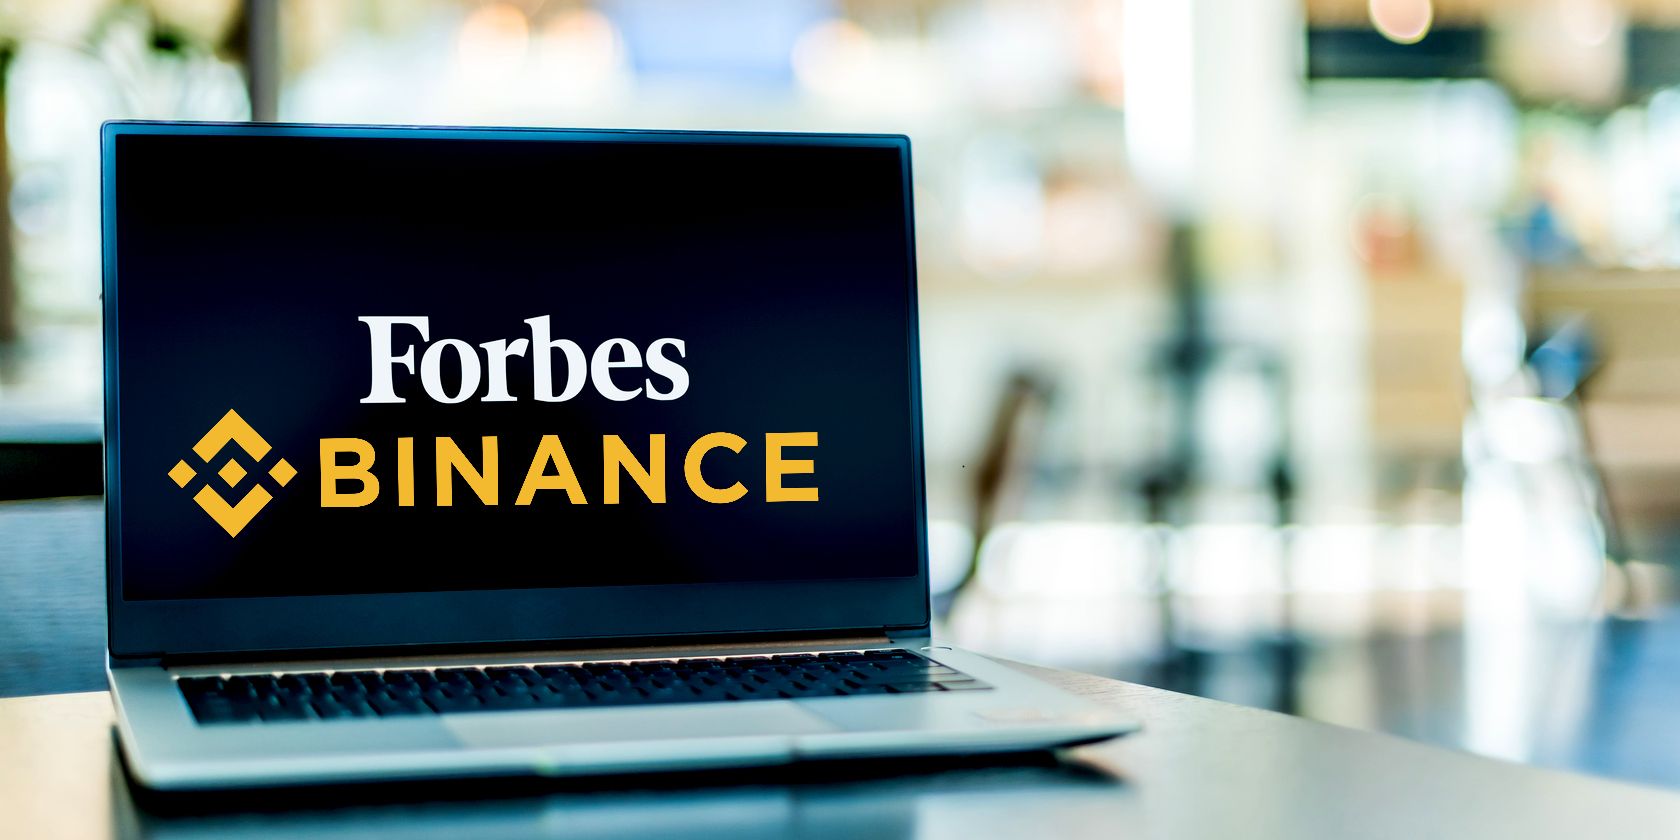 forbes binance logo on laptop feature